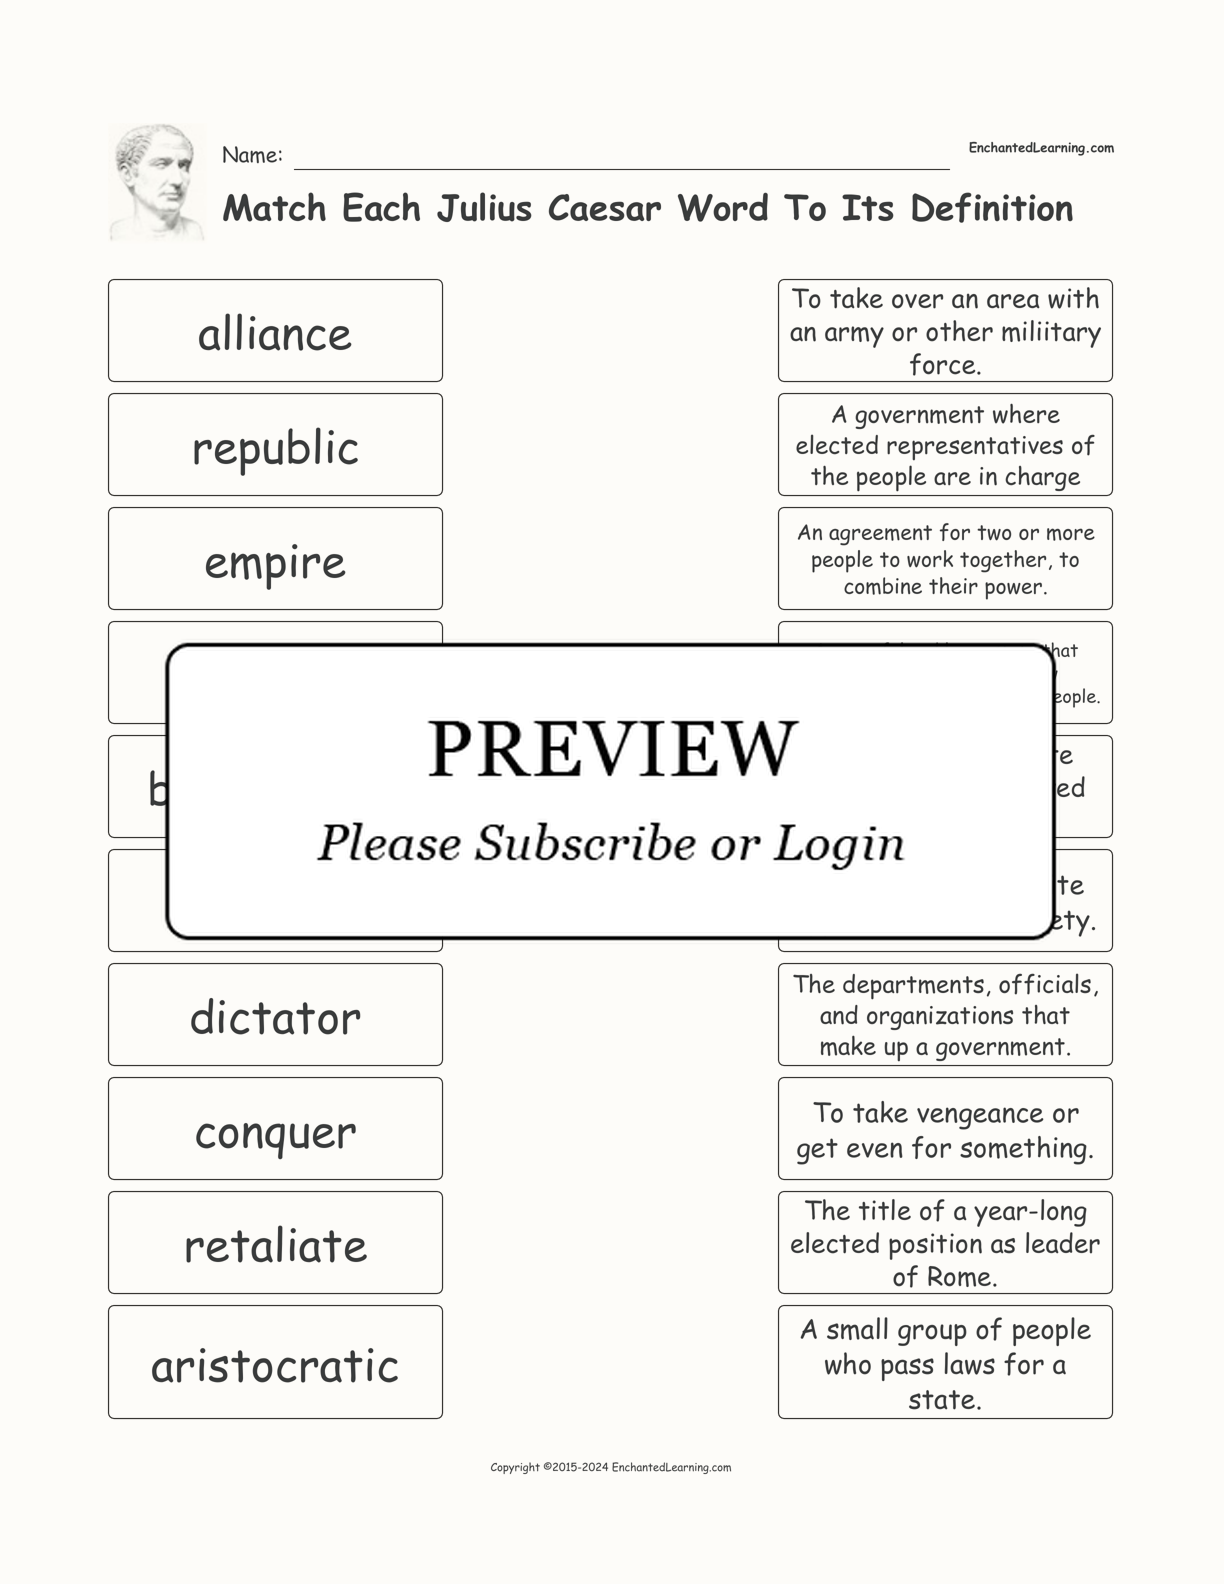 Match Each Julius Caesar Word To Its Definition interactive worksheet page 1